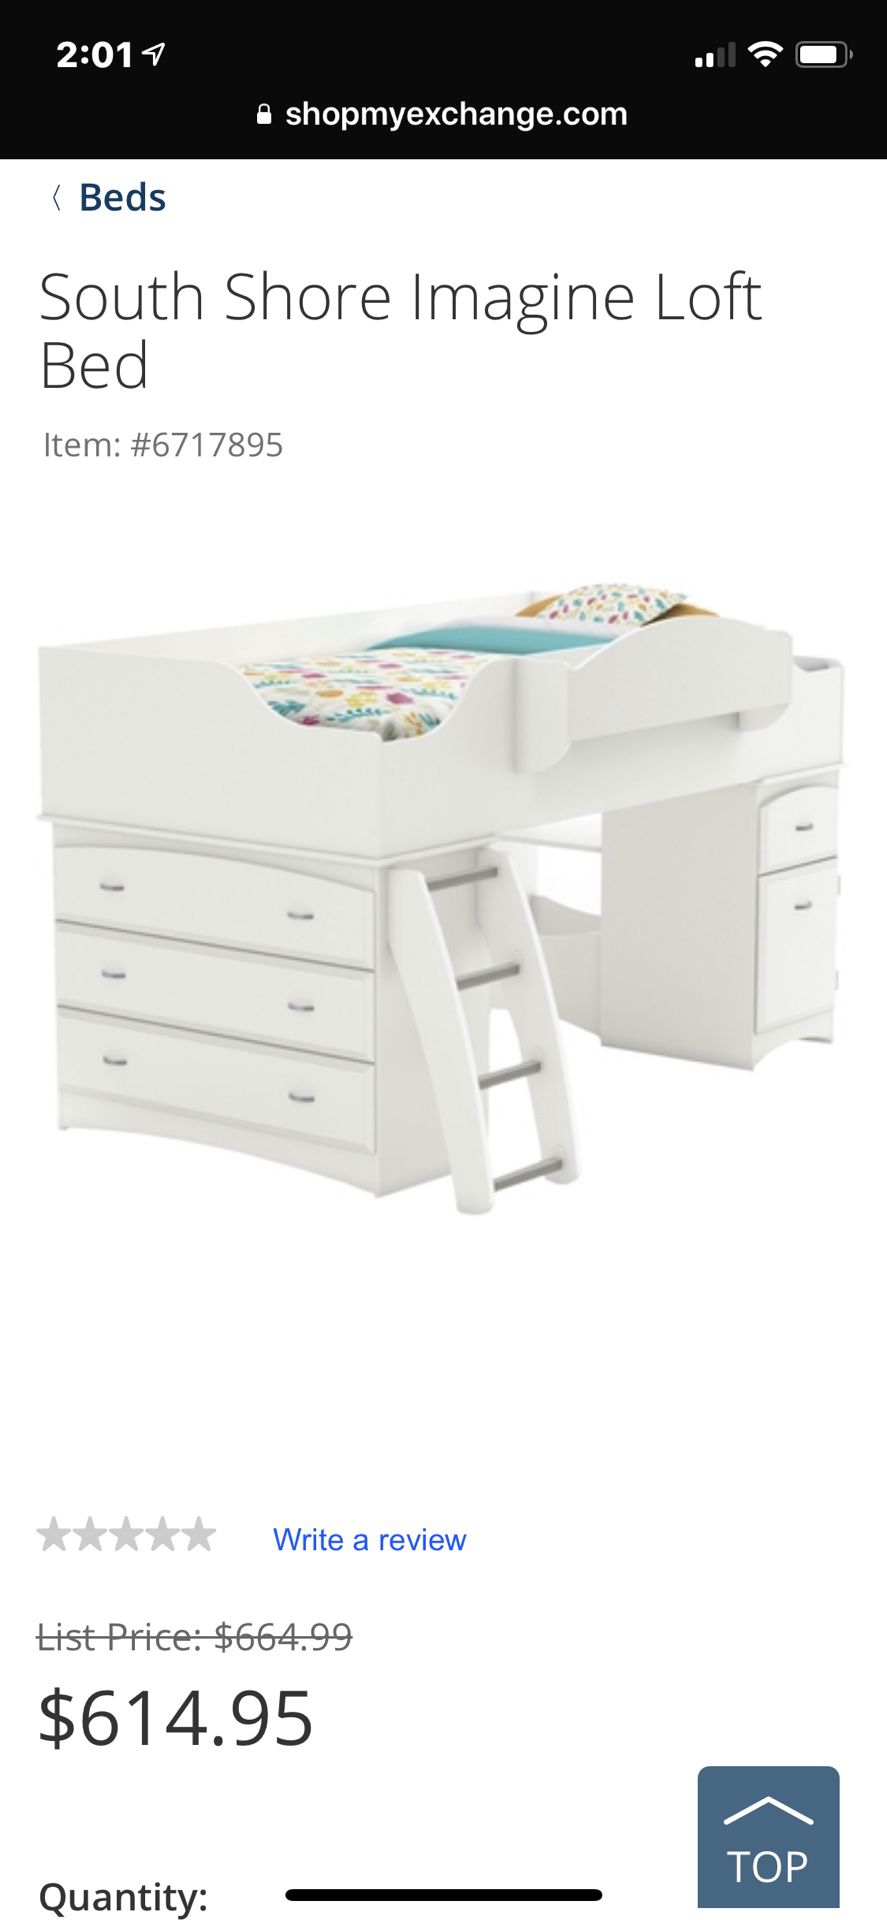 NEW Loft Bed for boy or girl!